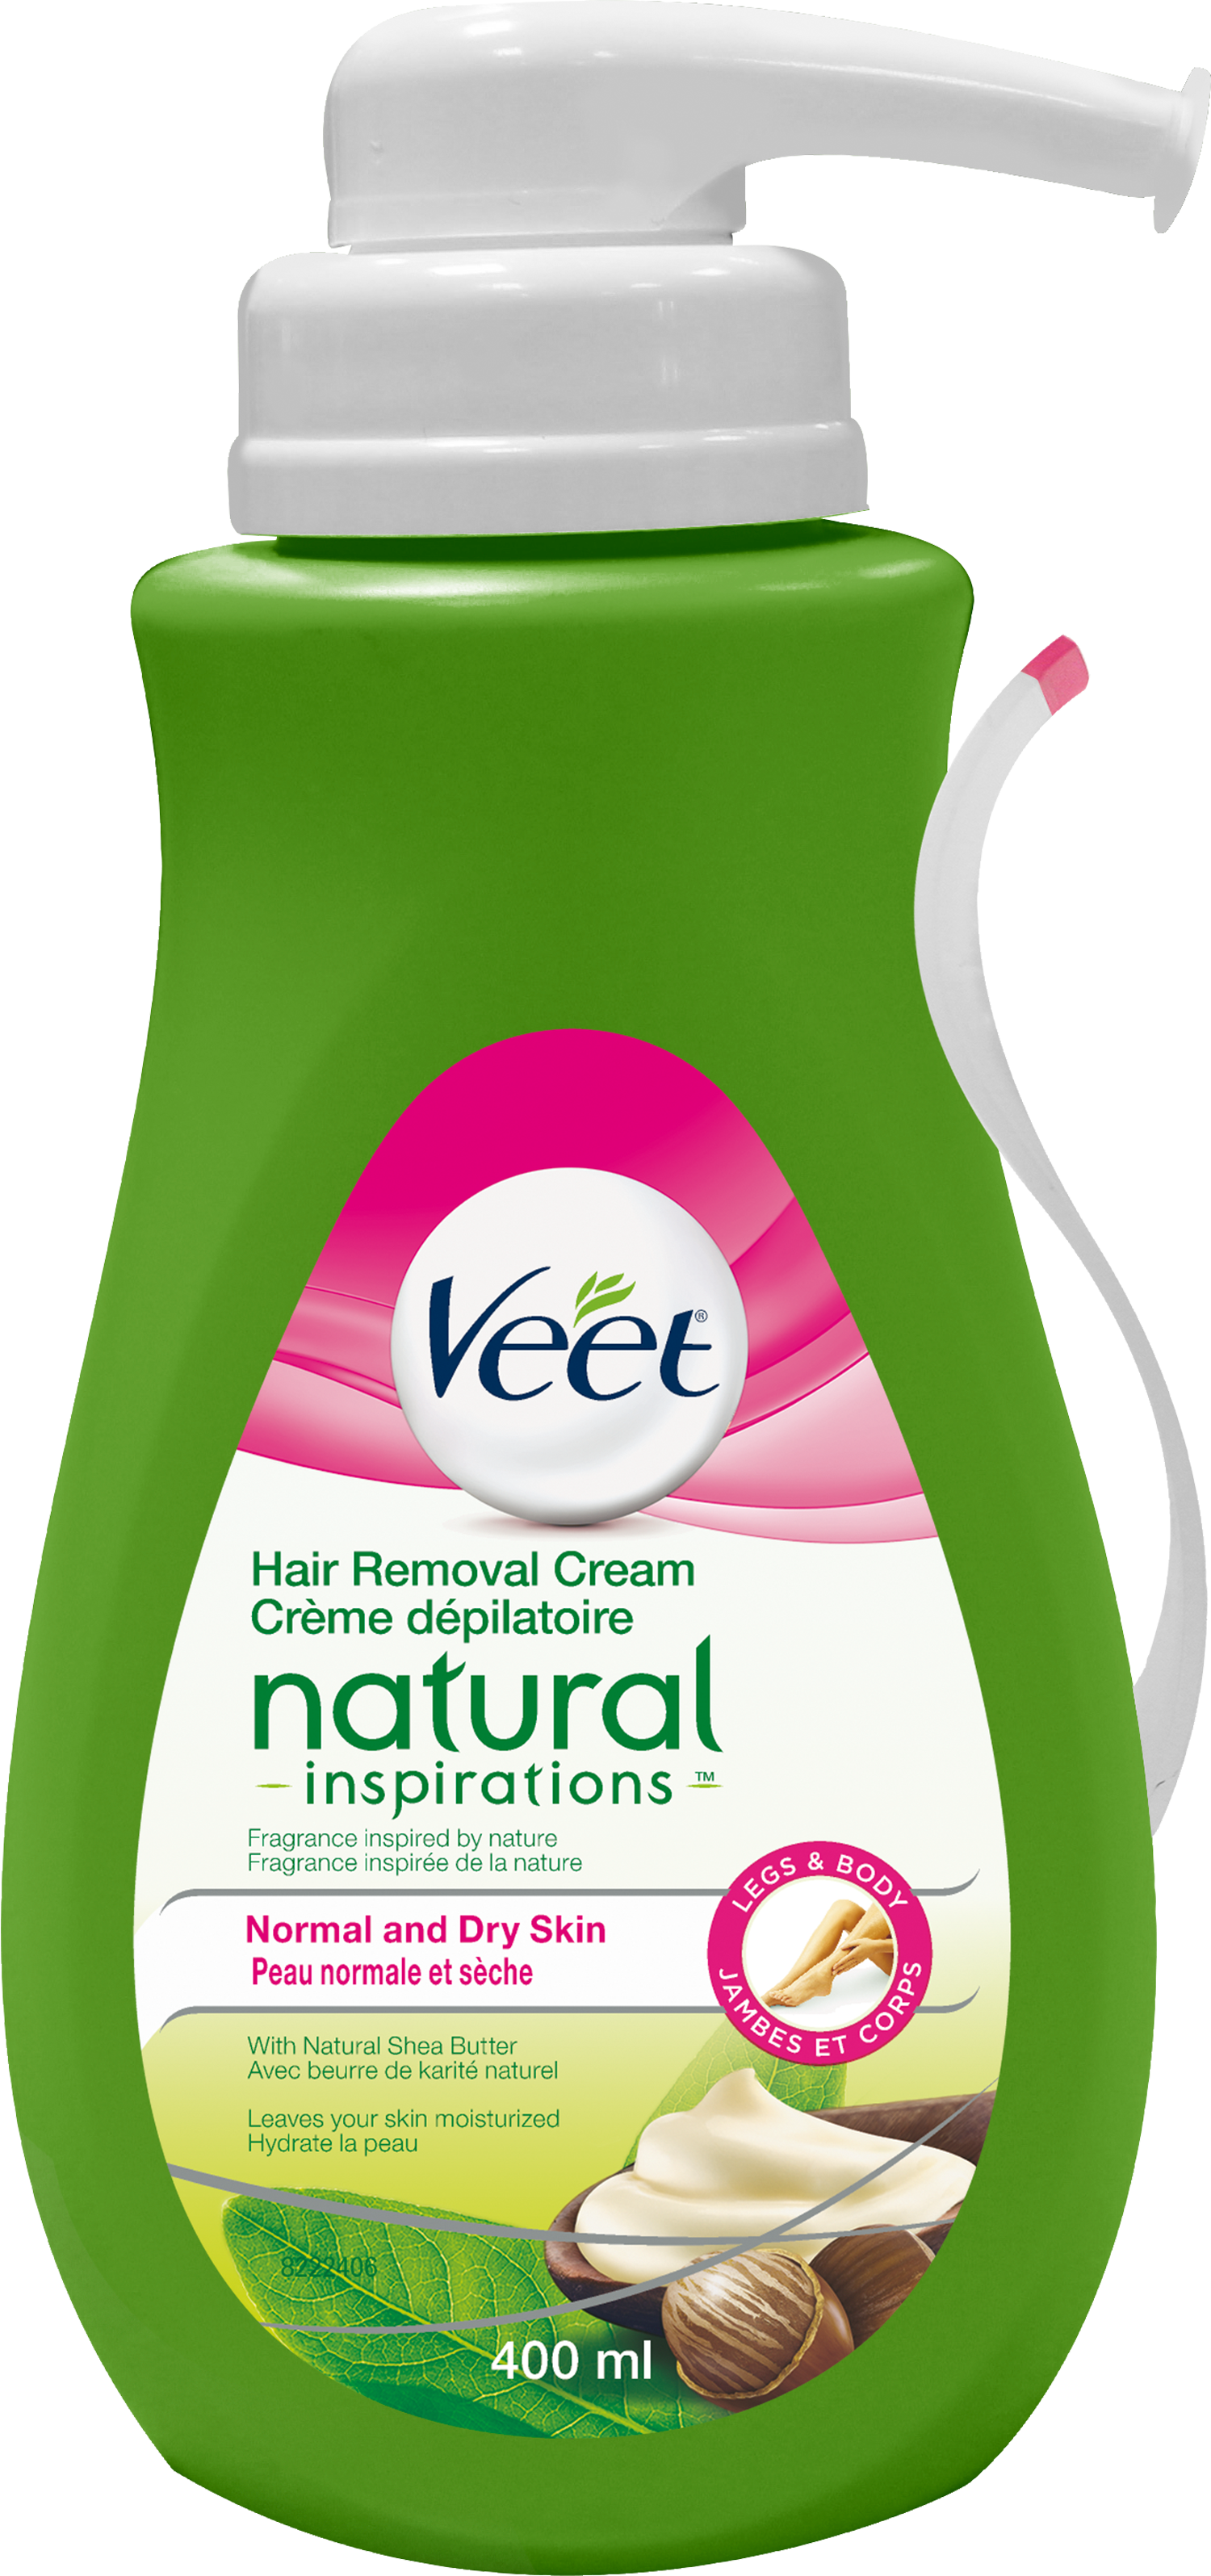 VEET® Natural Inspirations™ Hair Removal Cream - Normal & Dry Skin pump (Canada)